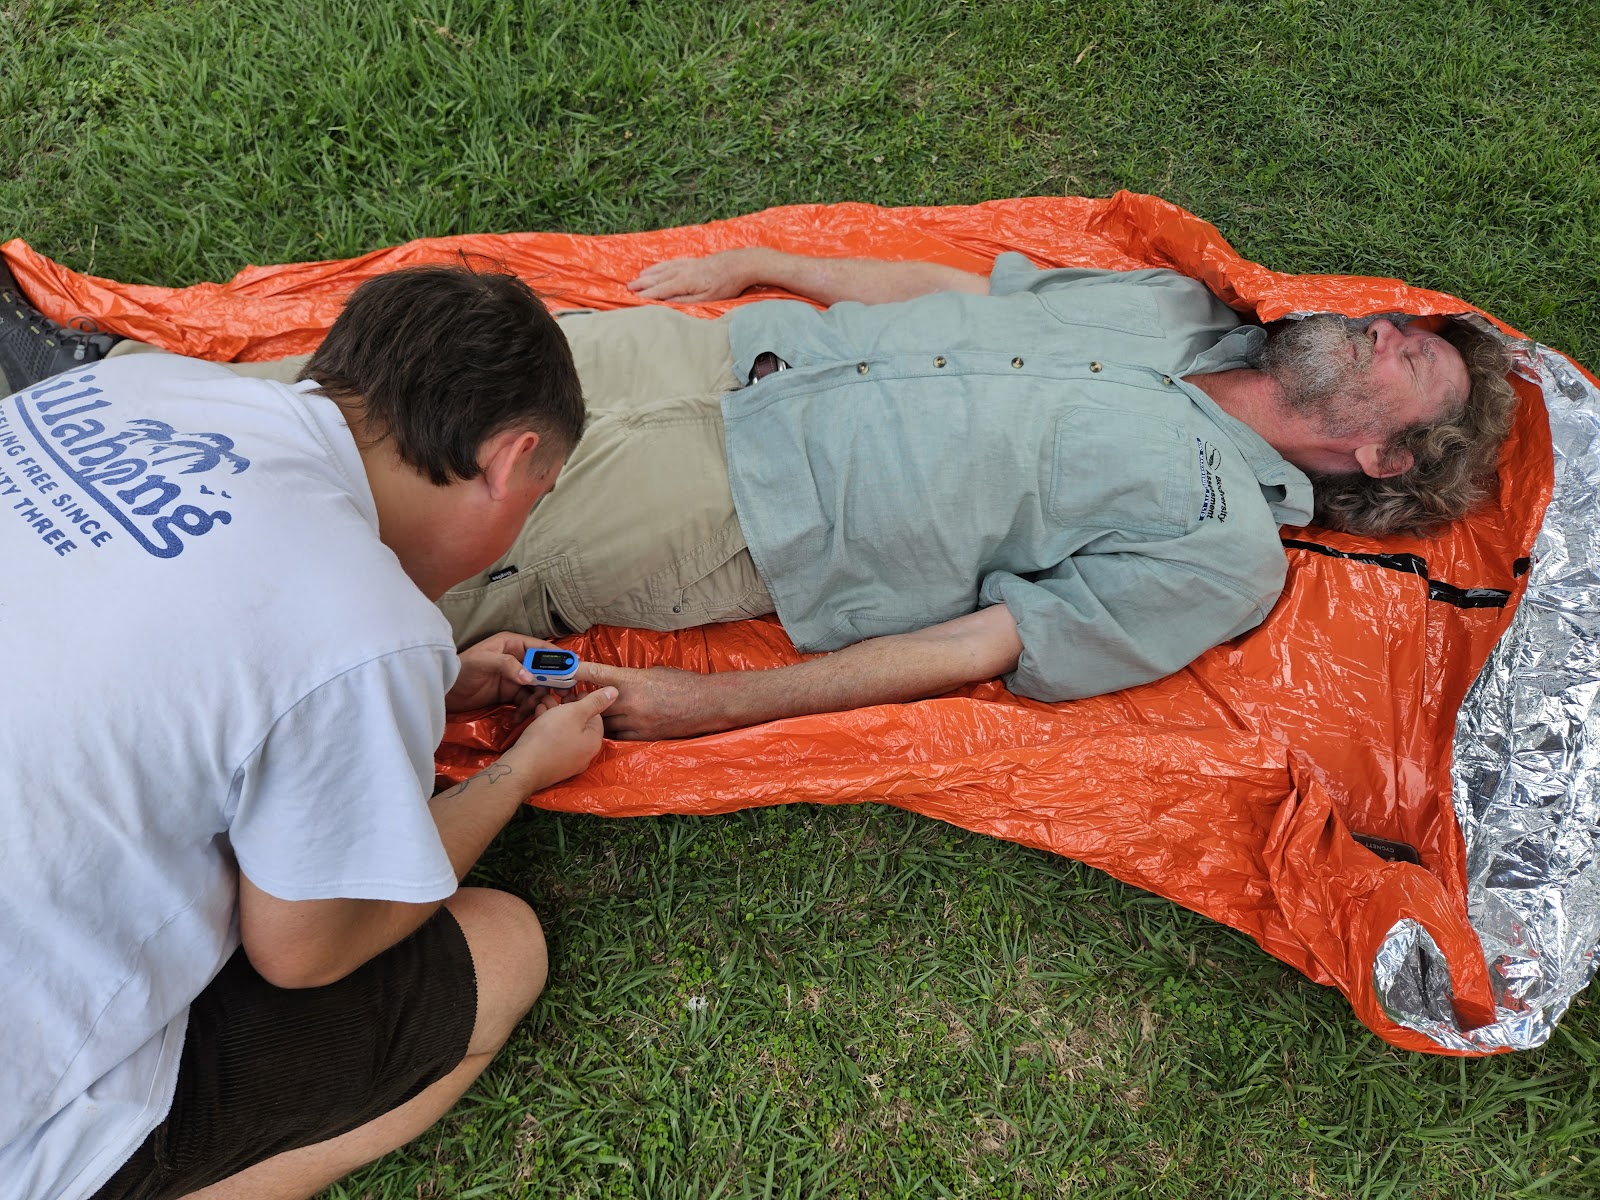 It's important to know how to read pulse and blood oxygen in remote first aid situations.